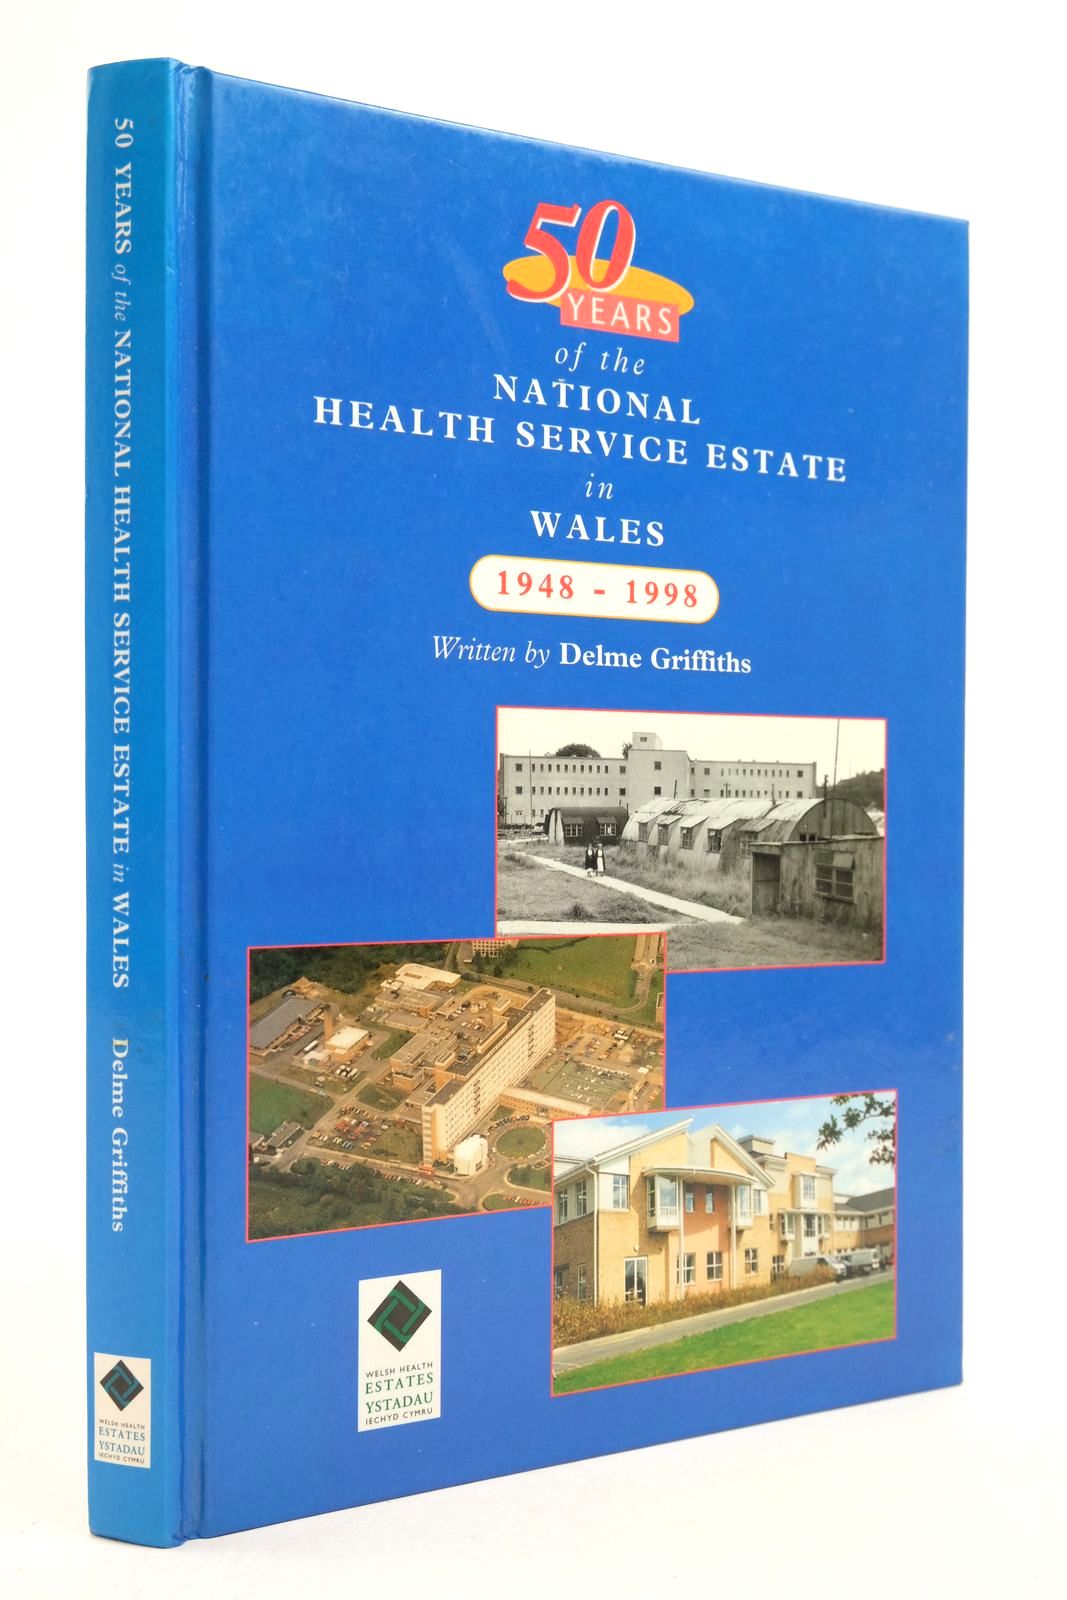 Photo of 50 YEARS OF THE NATIONAL HEALTH SERVICE ESTATE IN WALES 1948 - 1998 written by Griffiths, Delme published by Welsh Health Estates (STOCK CODE: 2139999)  for sale by Stella & Rose's Books